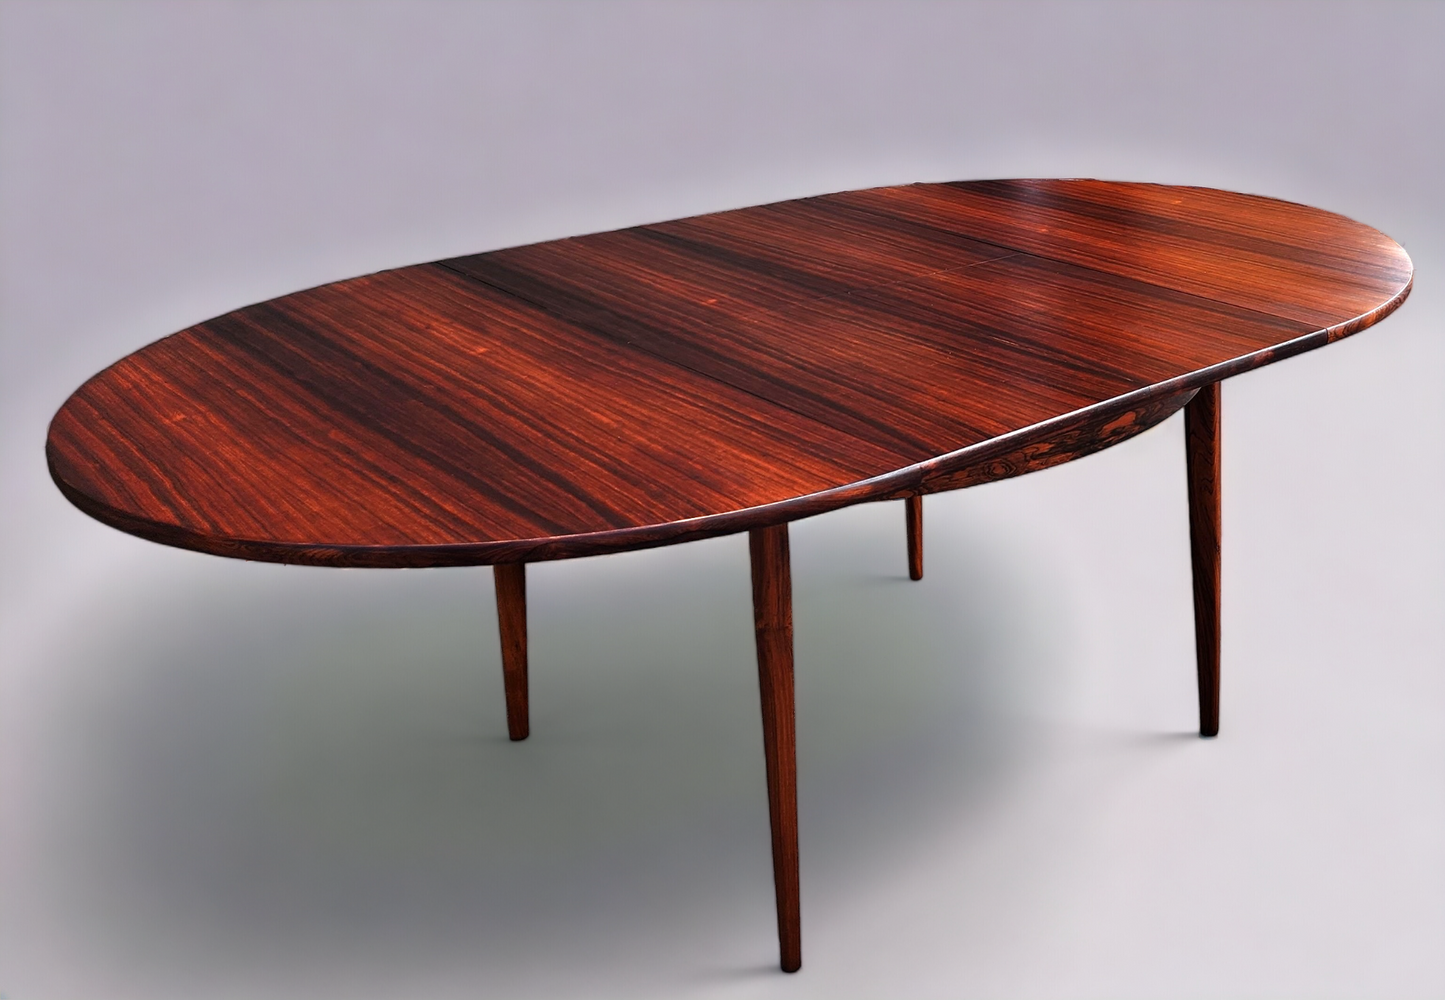 REFINISHED Danish MCM Rio Rosewood Table Round to Oval by Niels Moller 50"-78" Model 15, Selfstoring